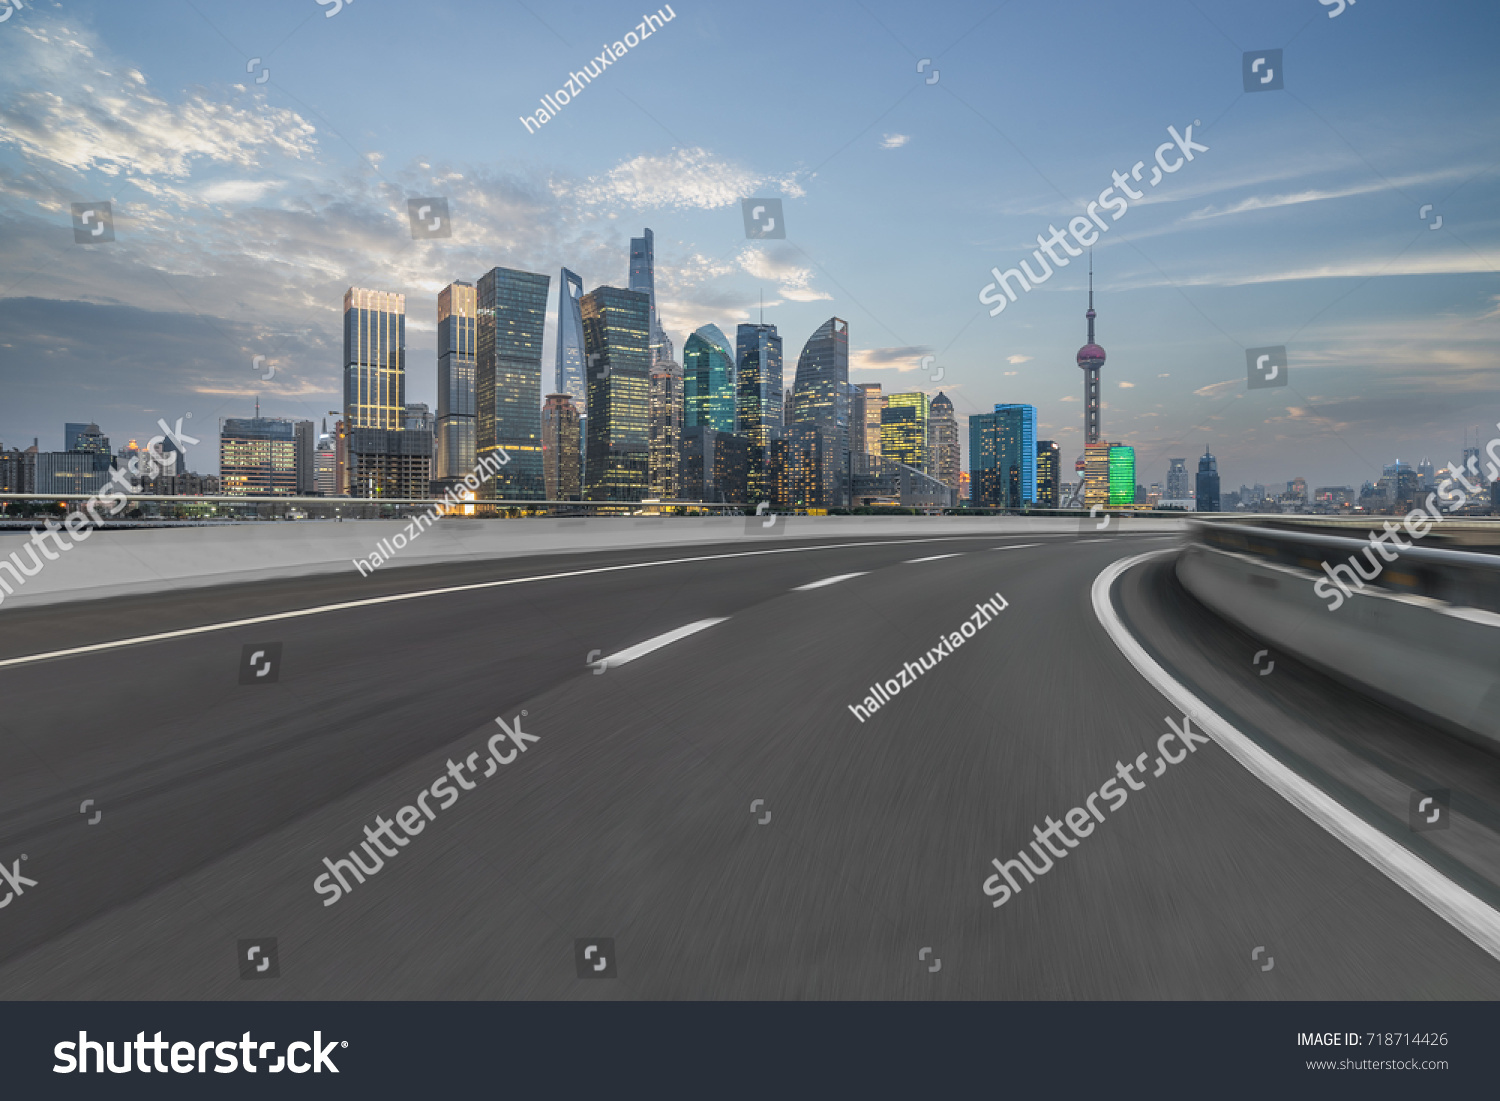 cityscape and skyline of shanghai from empty asphalt road #718714426